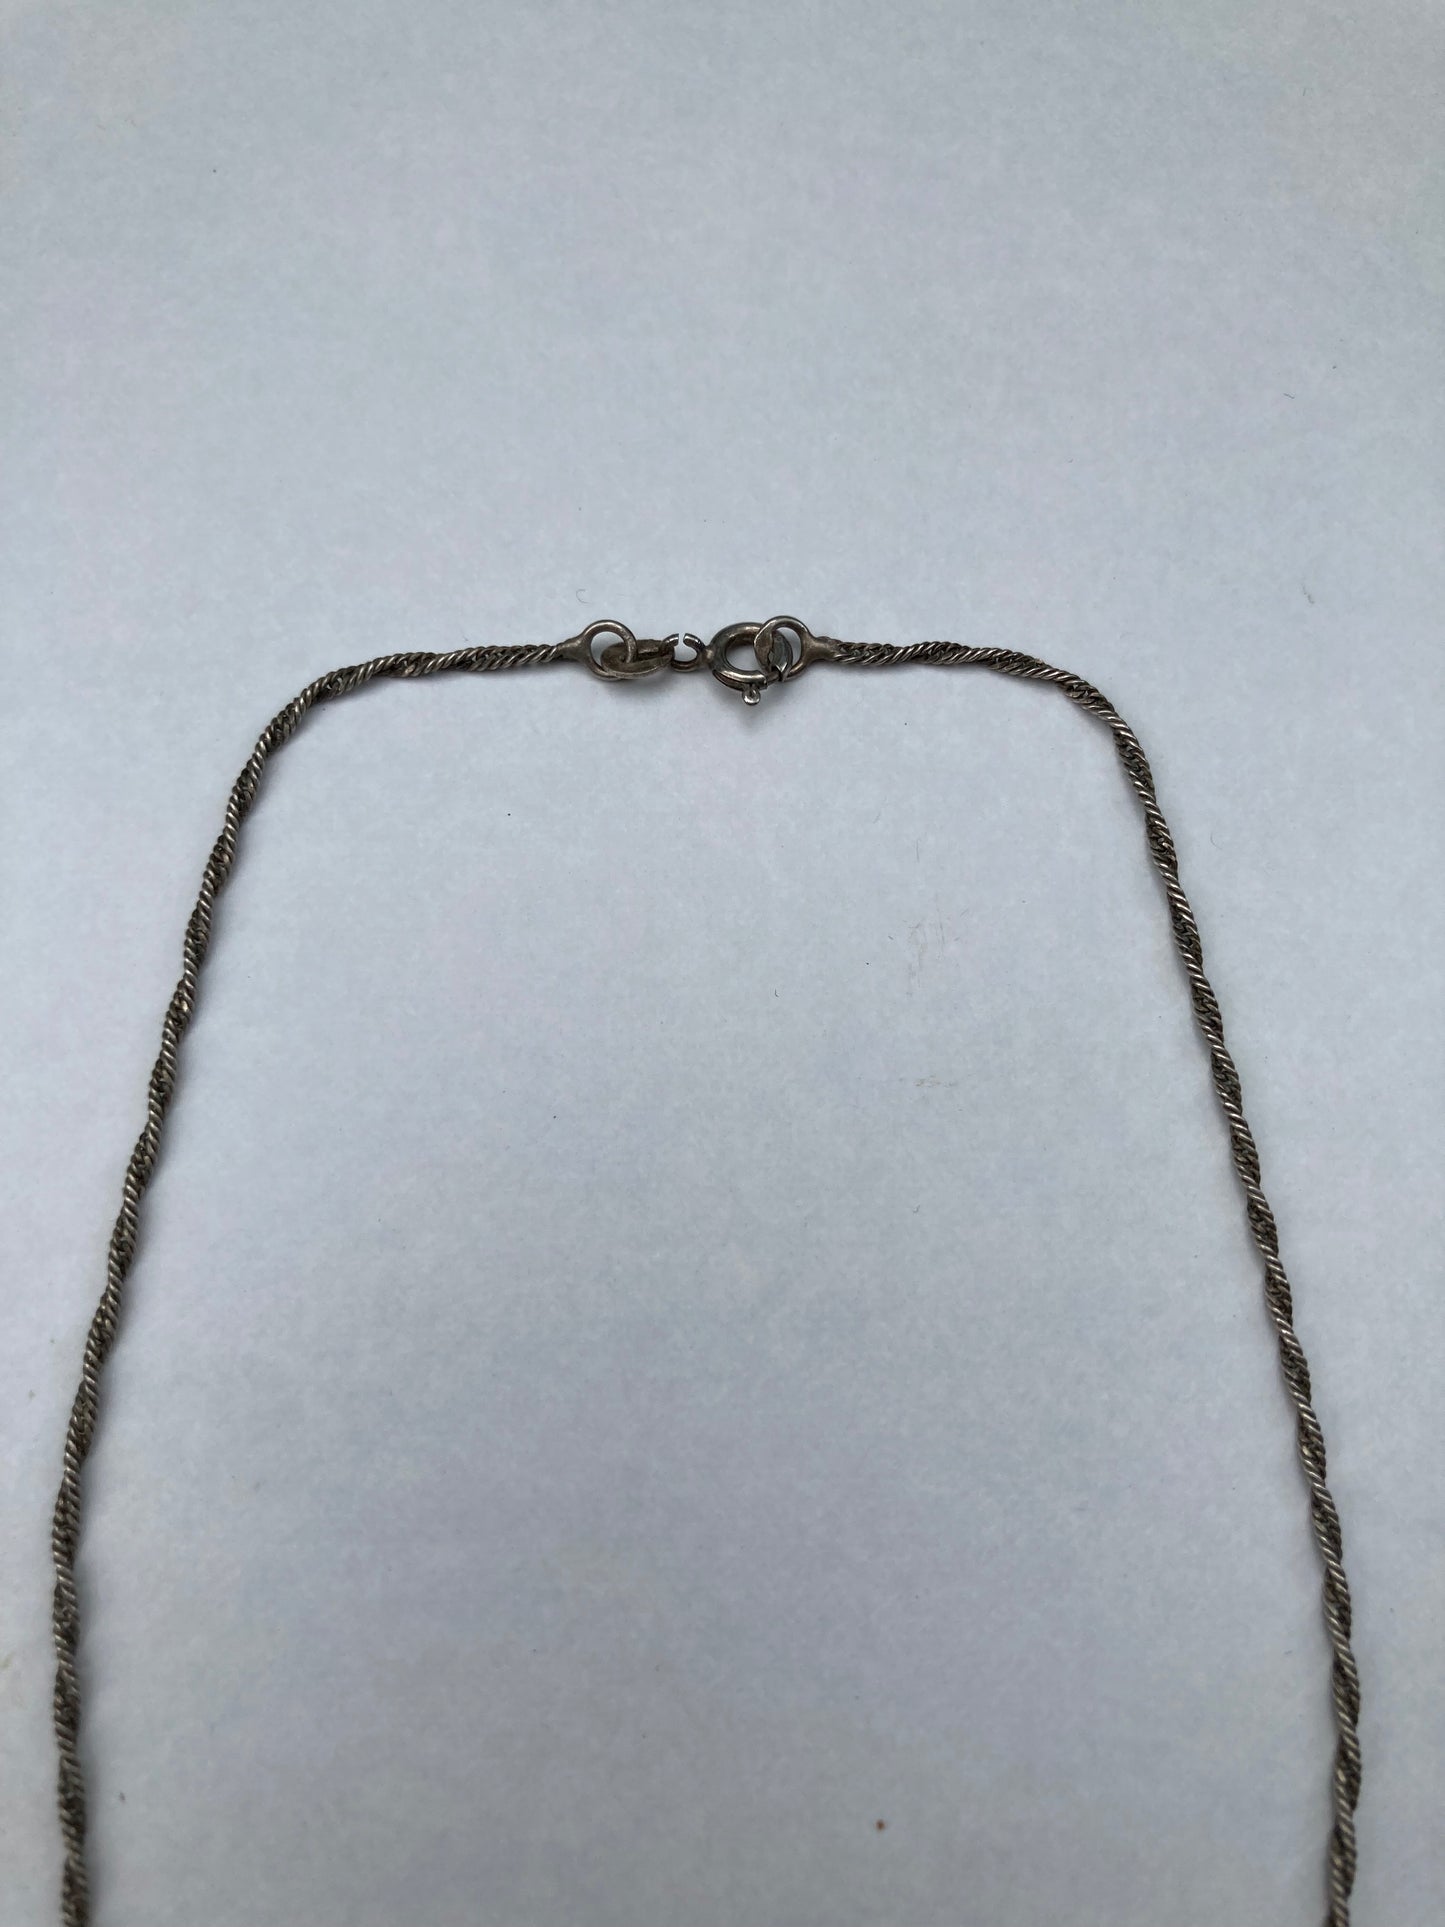 Silver Lotus Flower Pendant Twisted Necklace Vintage